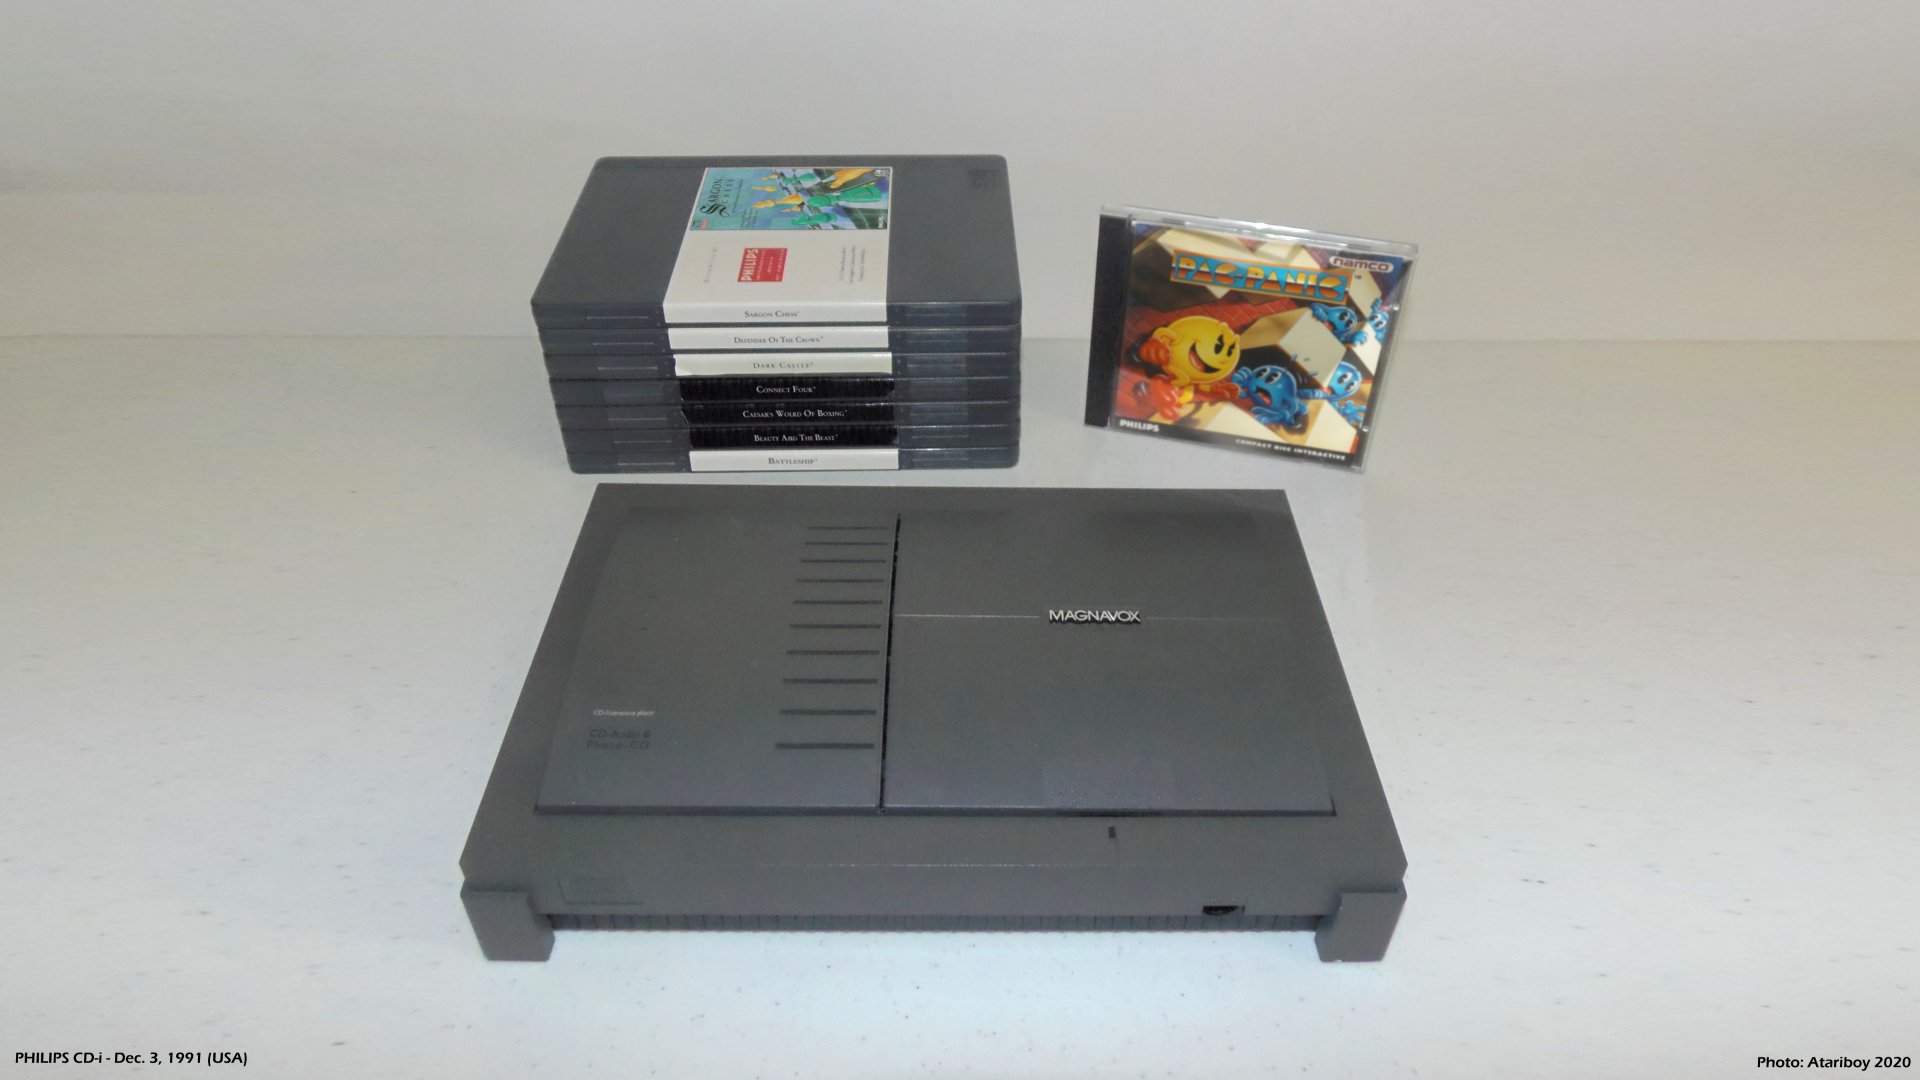 Launches Video Games 1991 Philips Cd I By Atariboy2600 On Deviantart